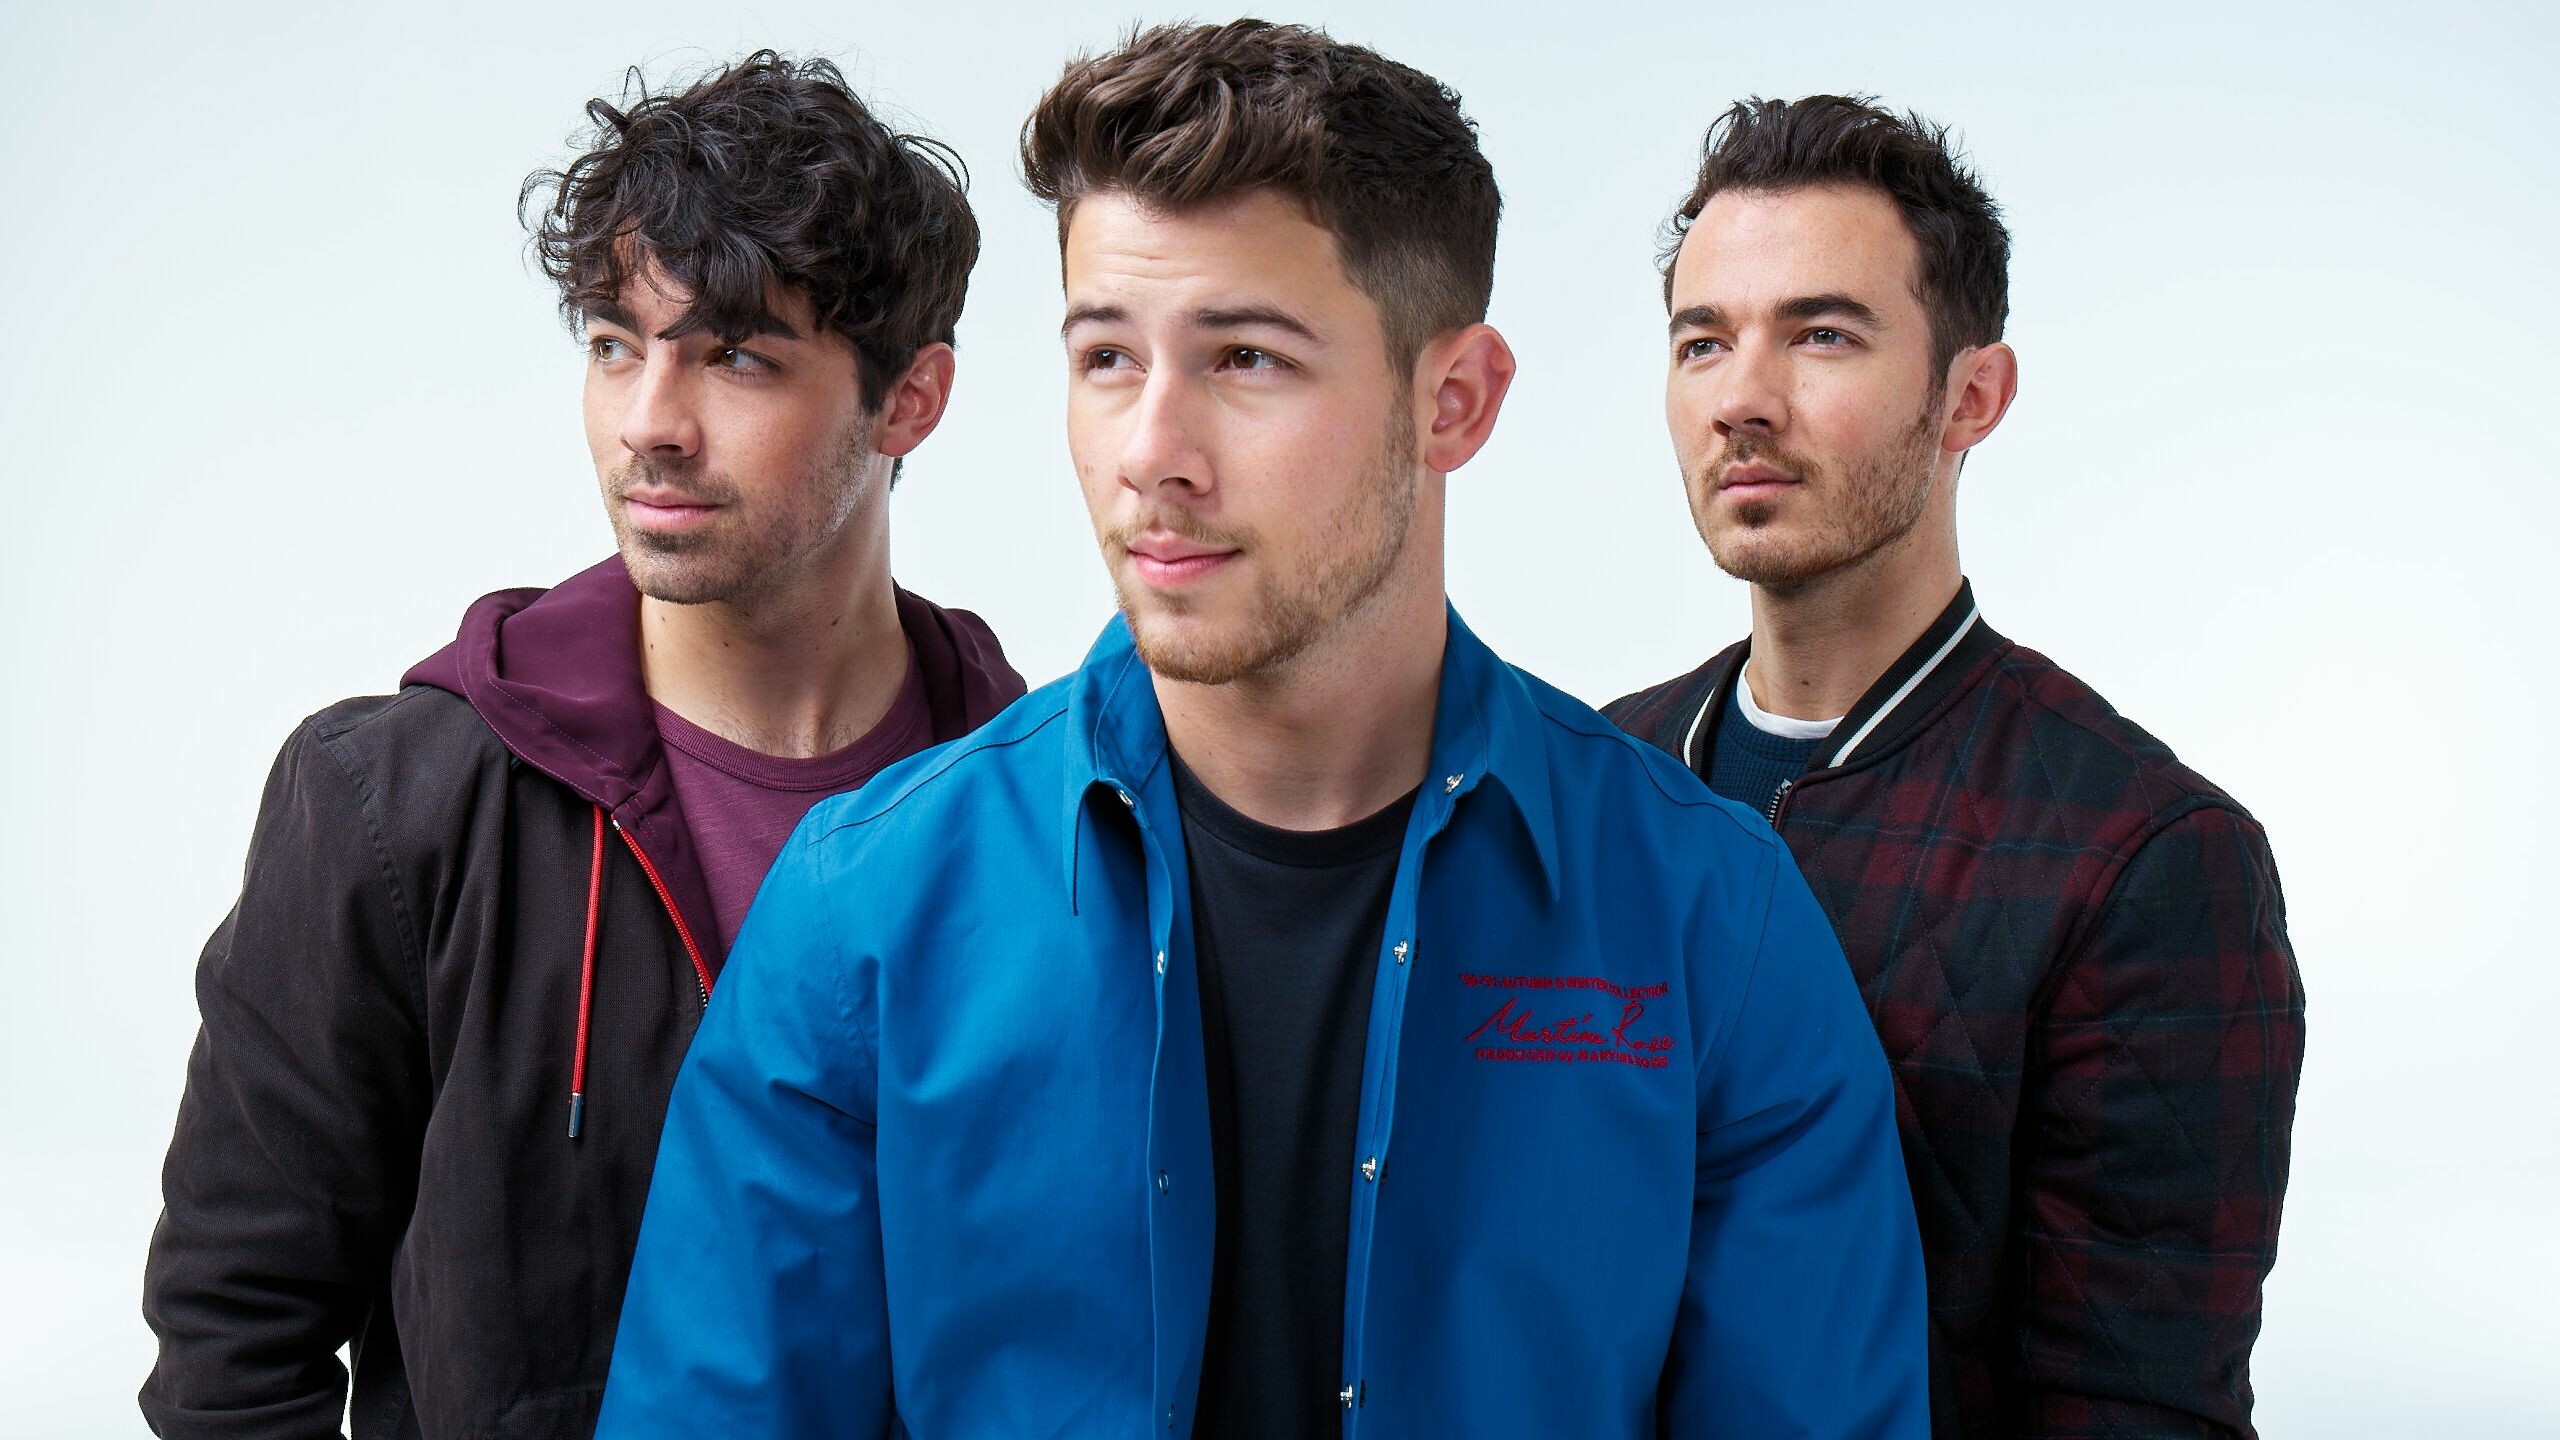 Jonas Brothers: "When You Look Me in the Eyes" reached number 25 on the U.S. Billboard Hot 100. 2560x1440 HD Background.